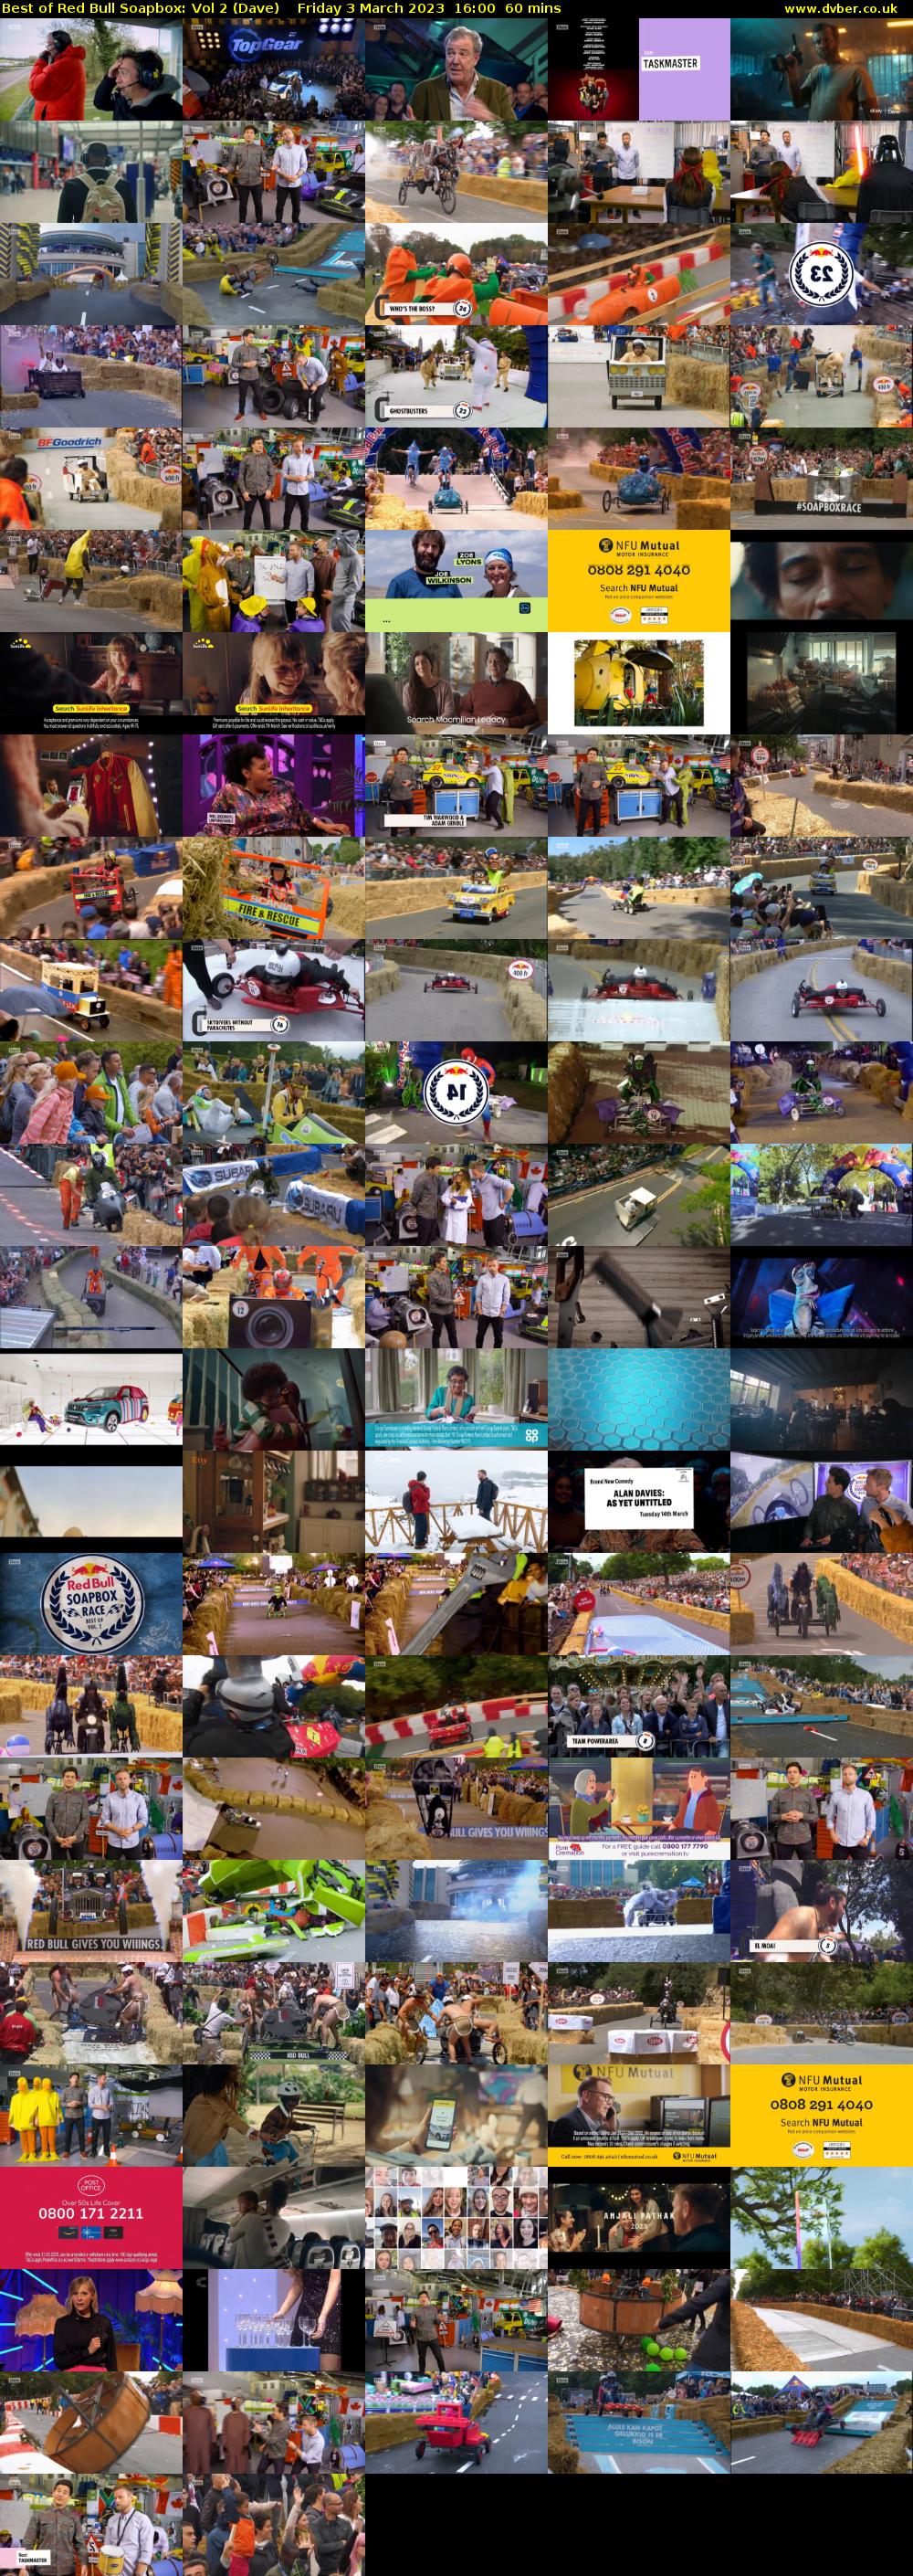 Best of Red Bull Soapbox: Vol 2 (Dave) Friday 3 March 2023 16:00 - 17:00